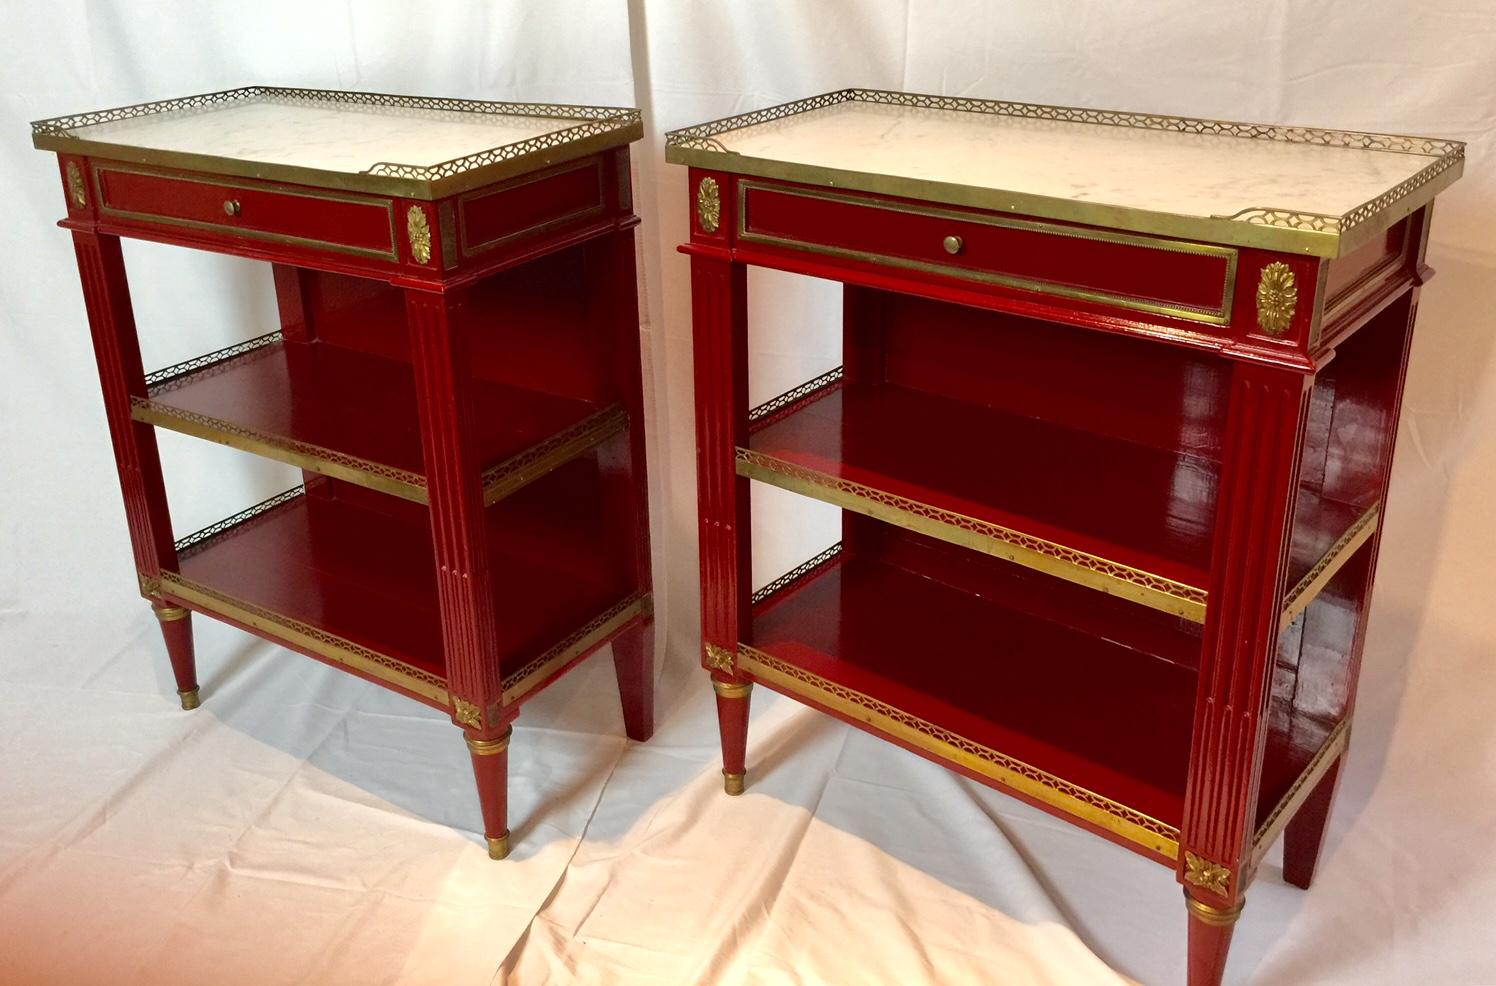 Exceptional and rare pair of lustrous red ebonized occasional tables. This three-tiered pair of side tables is made of ebonized wood with tôle and bronze hardware detail. The white marble top is edged by a pierced bronze gallery. The two lower tiers